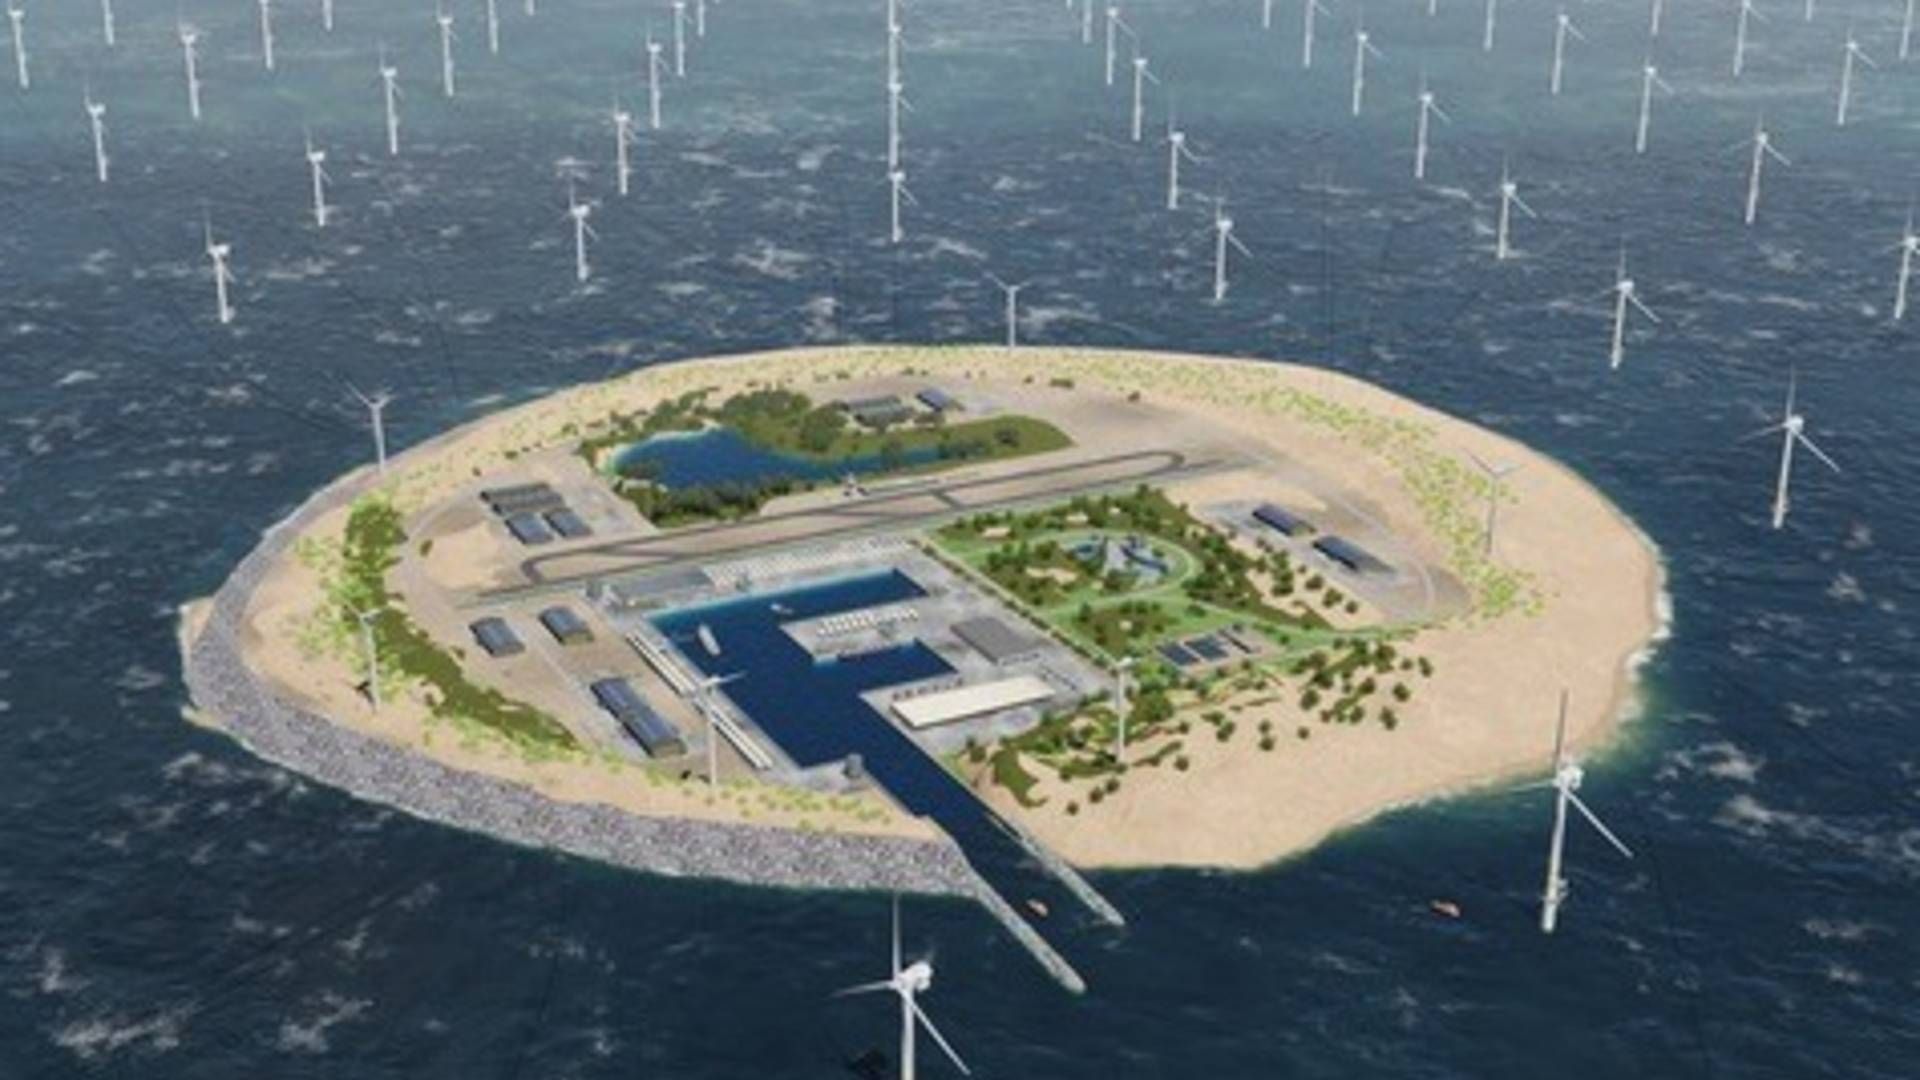 There is still significant uncertainty over the final design of the energy island in the Danish part of the North Sea. This was German TSO Tennet's original illustration of an artificial island. | Photo: PR - TenneT